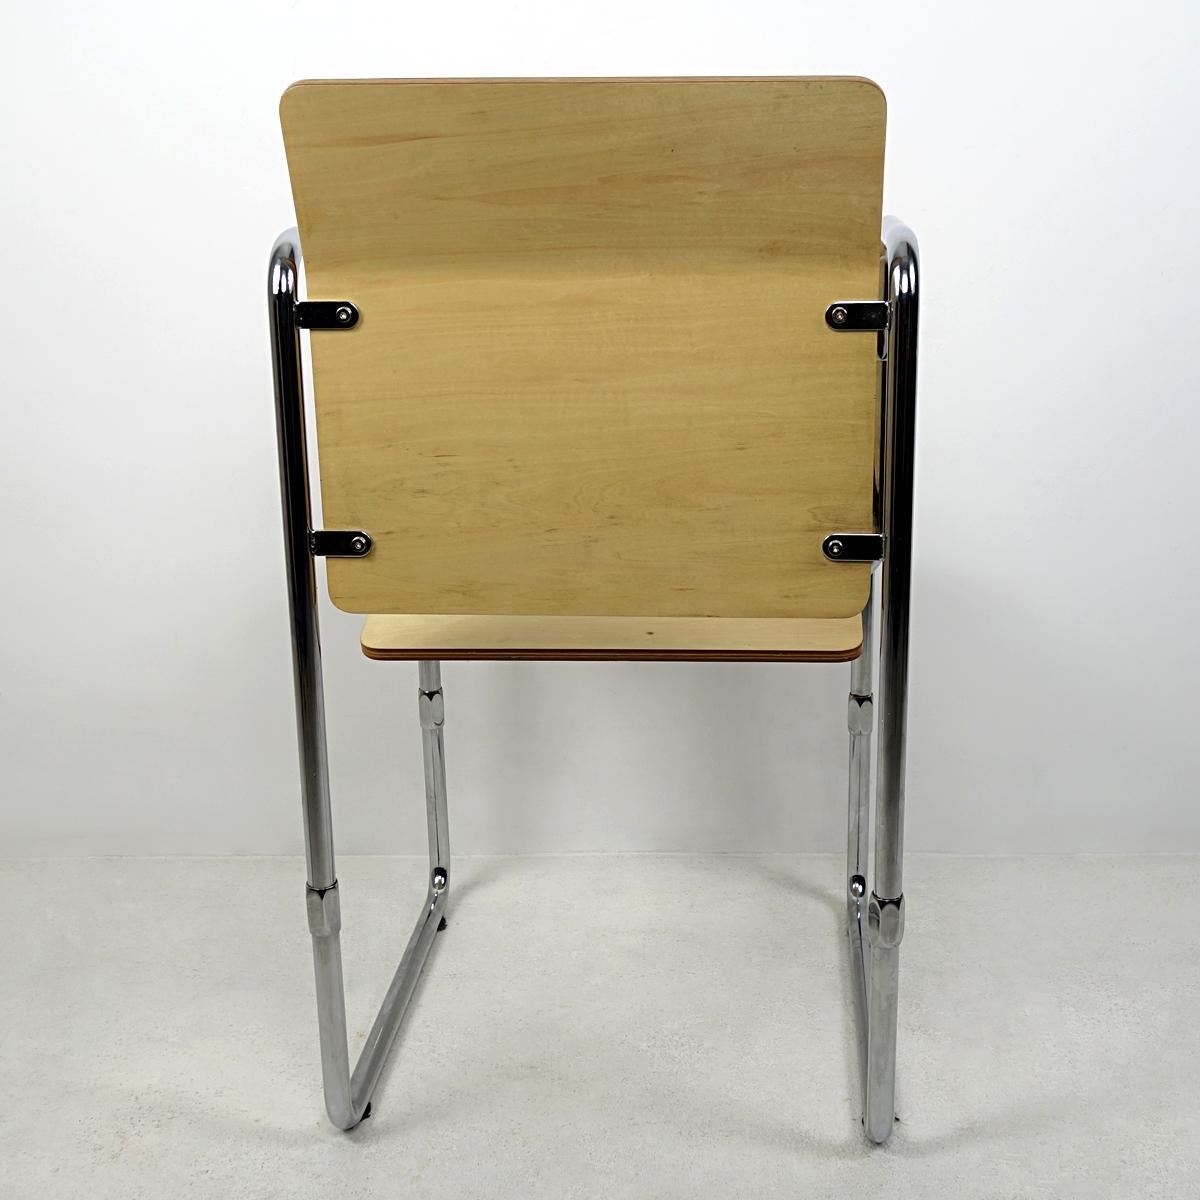 20th Century Modernist Hopmi Chair by Gerrit Rietveld Limited Edition Official Reproduction